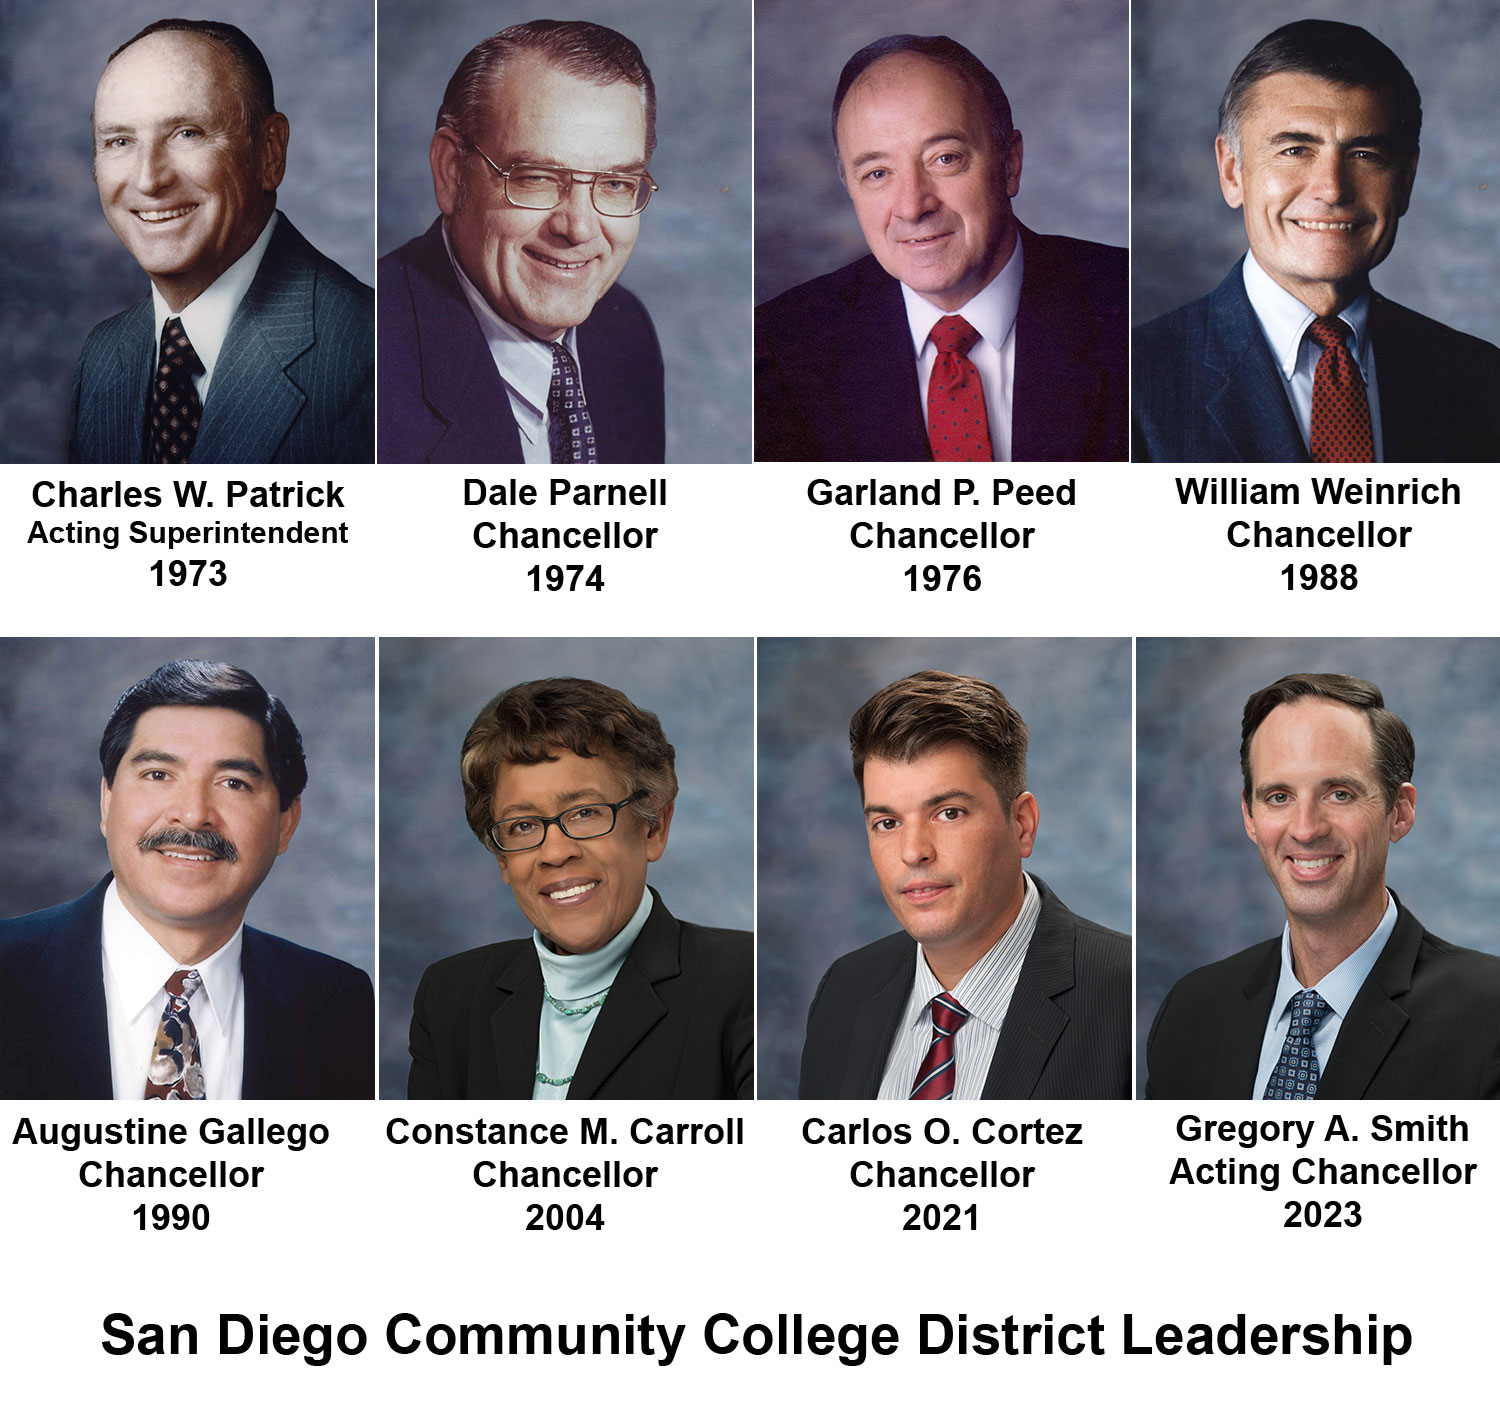 All eight sdccd leaders